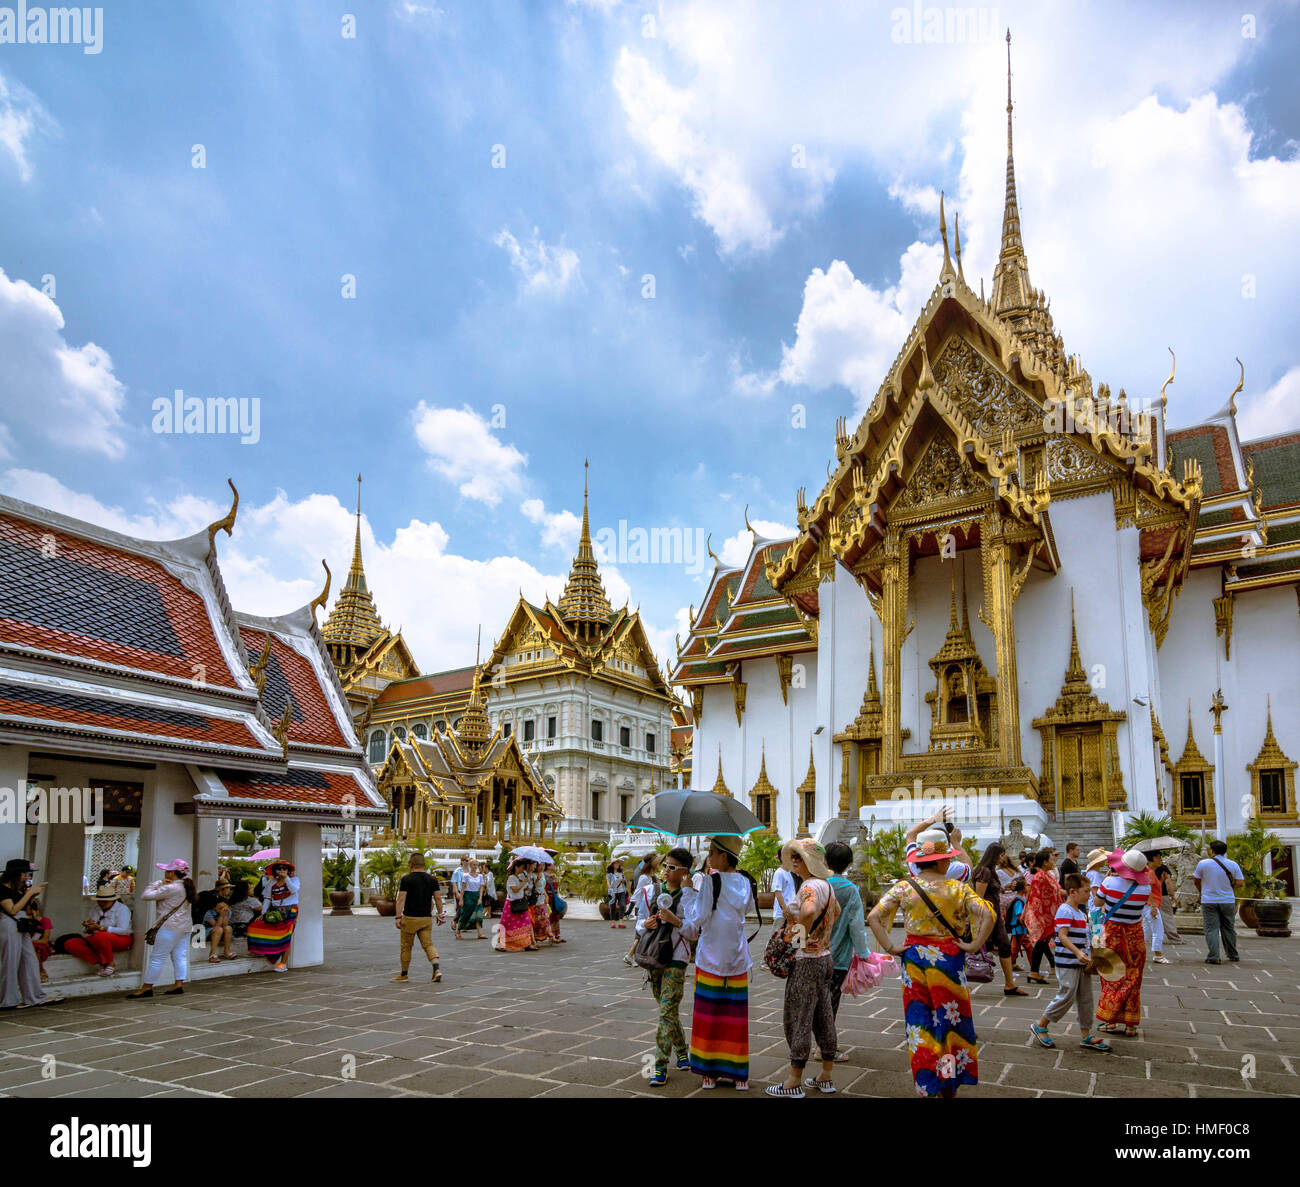 Phra Thinang Dusit Maha Prasat throne hall, an ideal of Thai architecture, in the Grand Palace in Bangkok (Thailand) Stock Photo